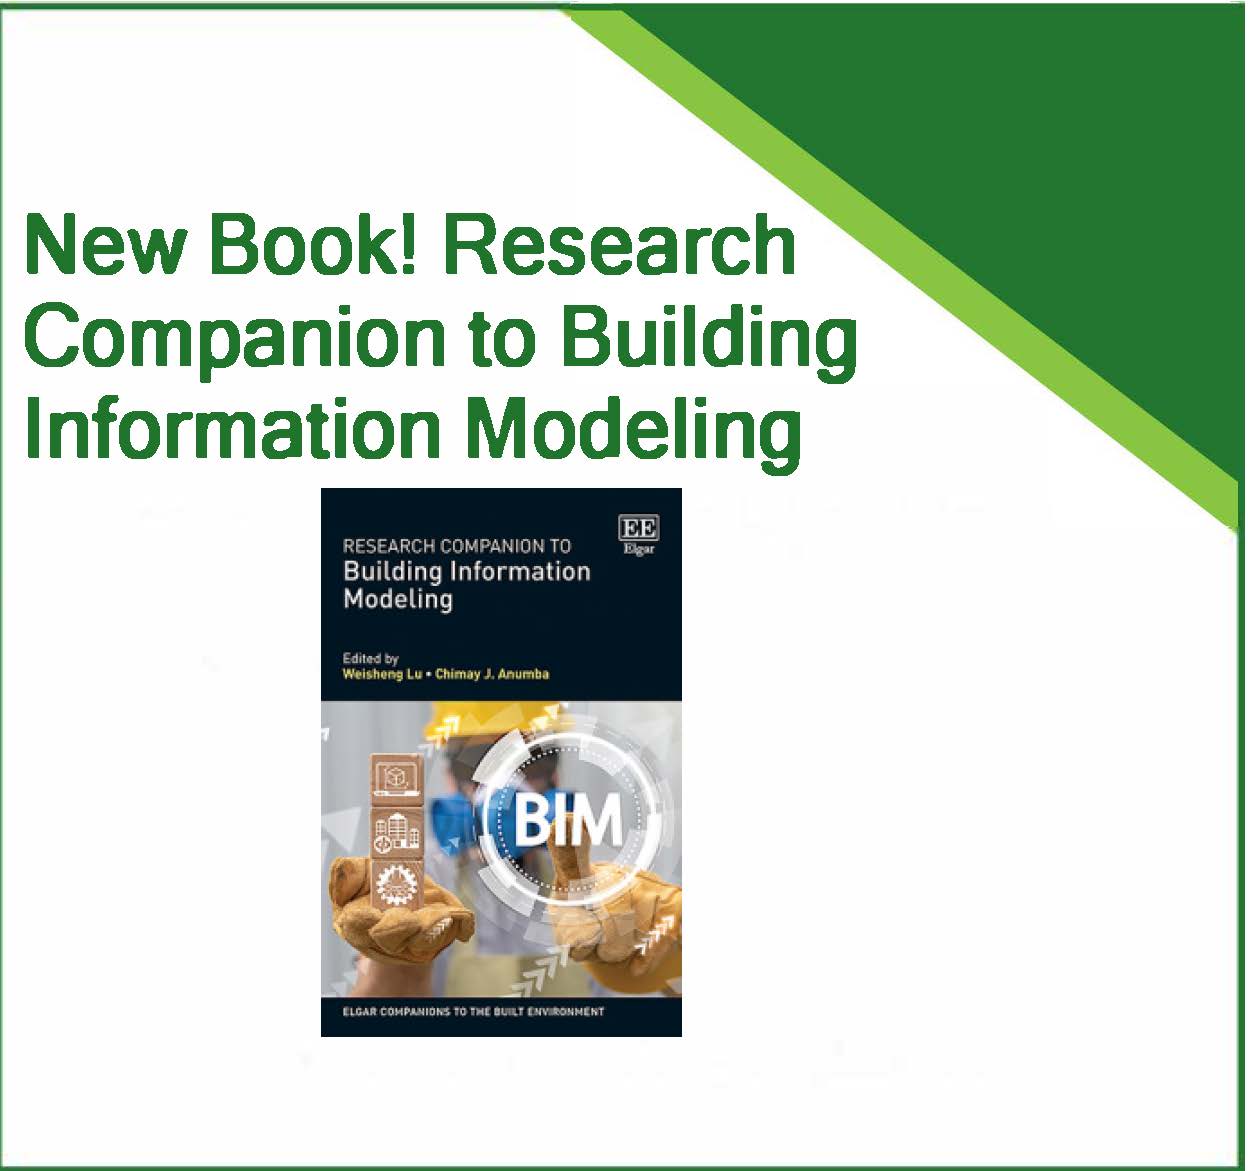 new book Research Companion to Building Information Modeling published by Edward Elgar (EE)